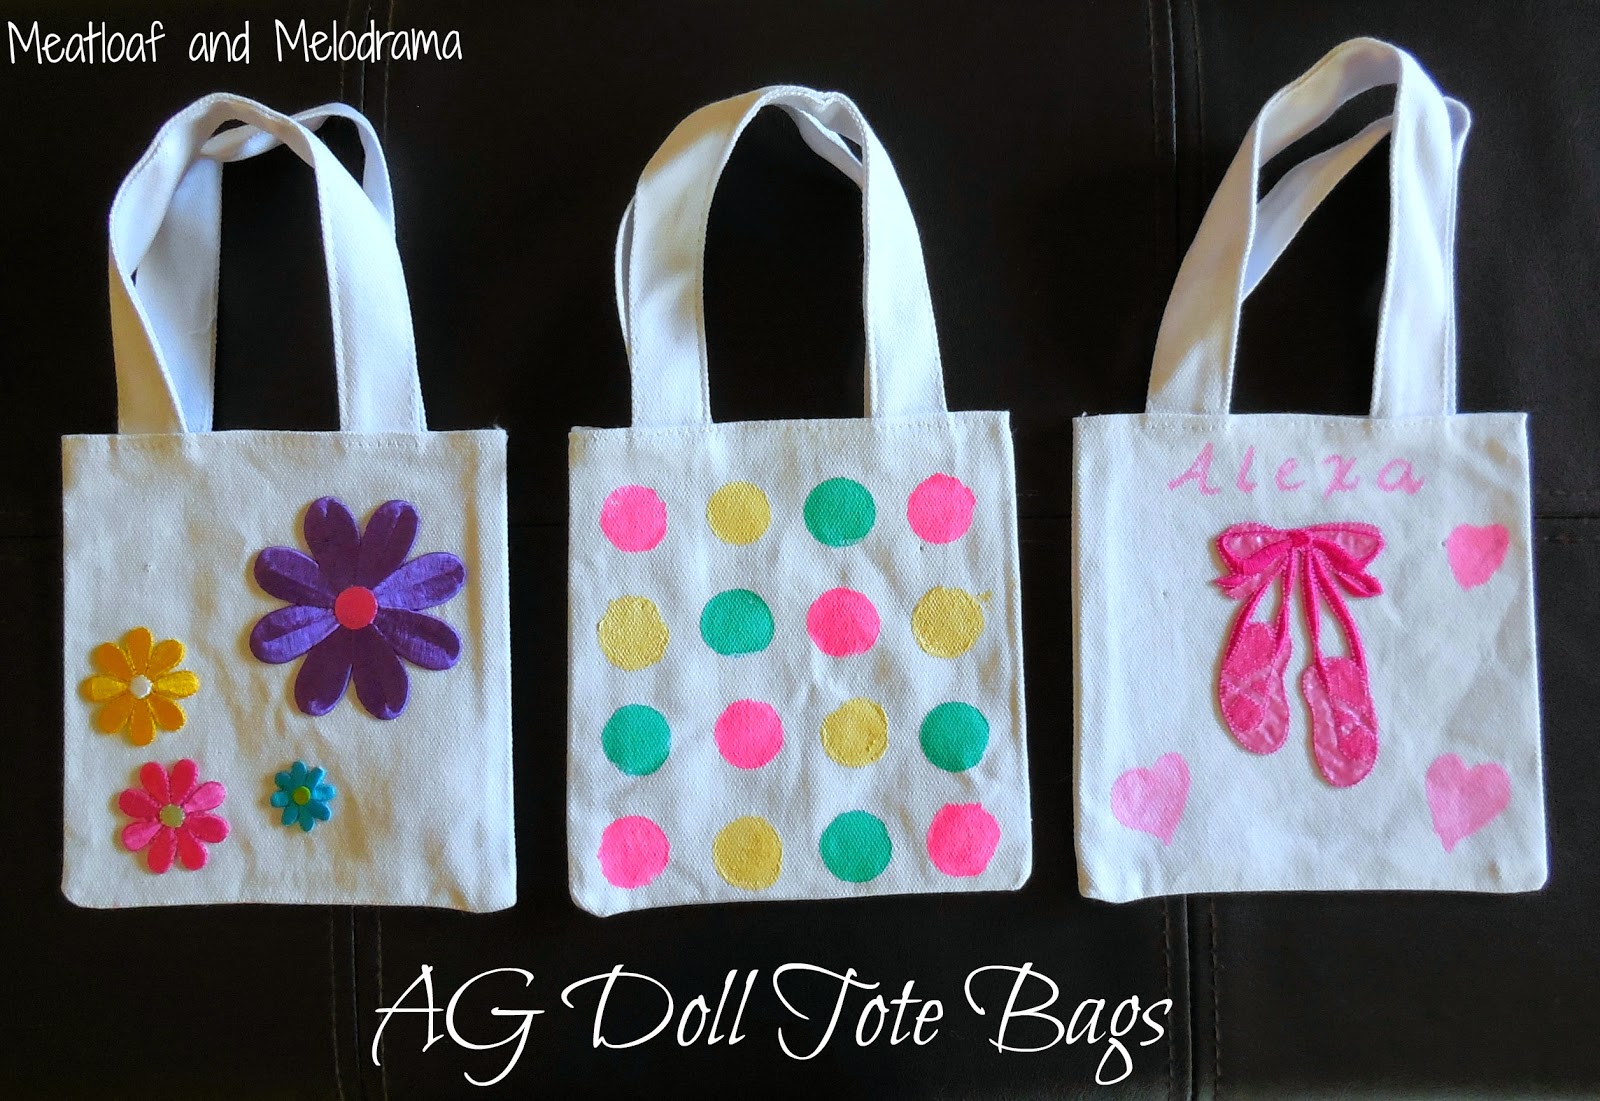 decorated ag doll tote bags